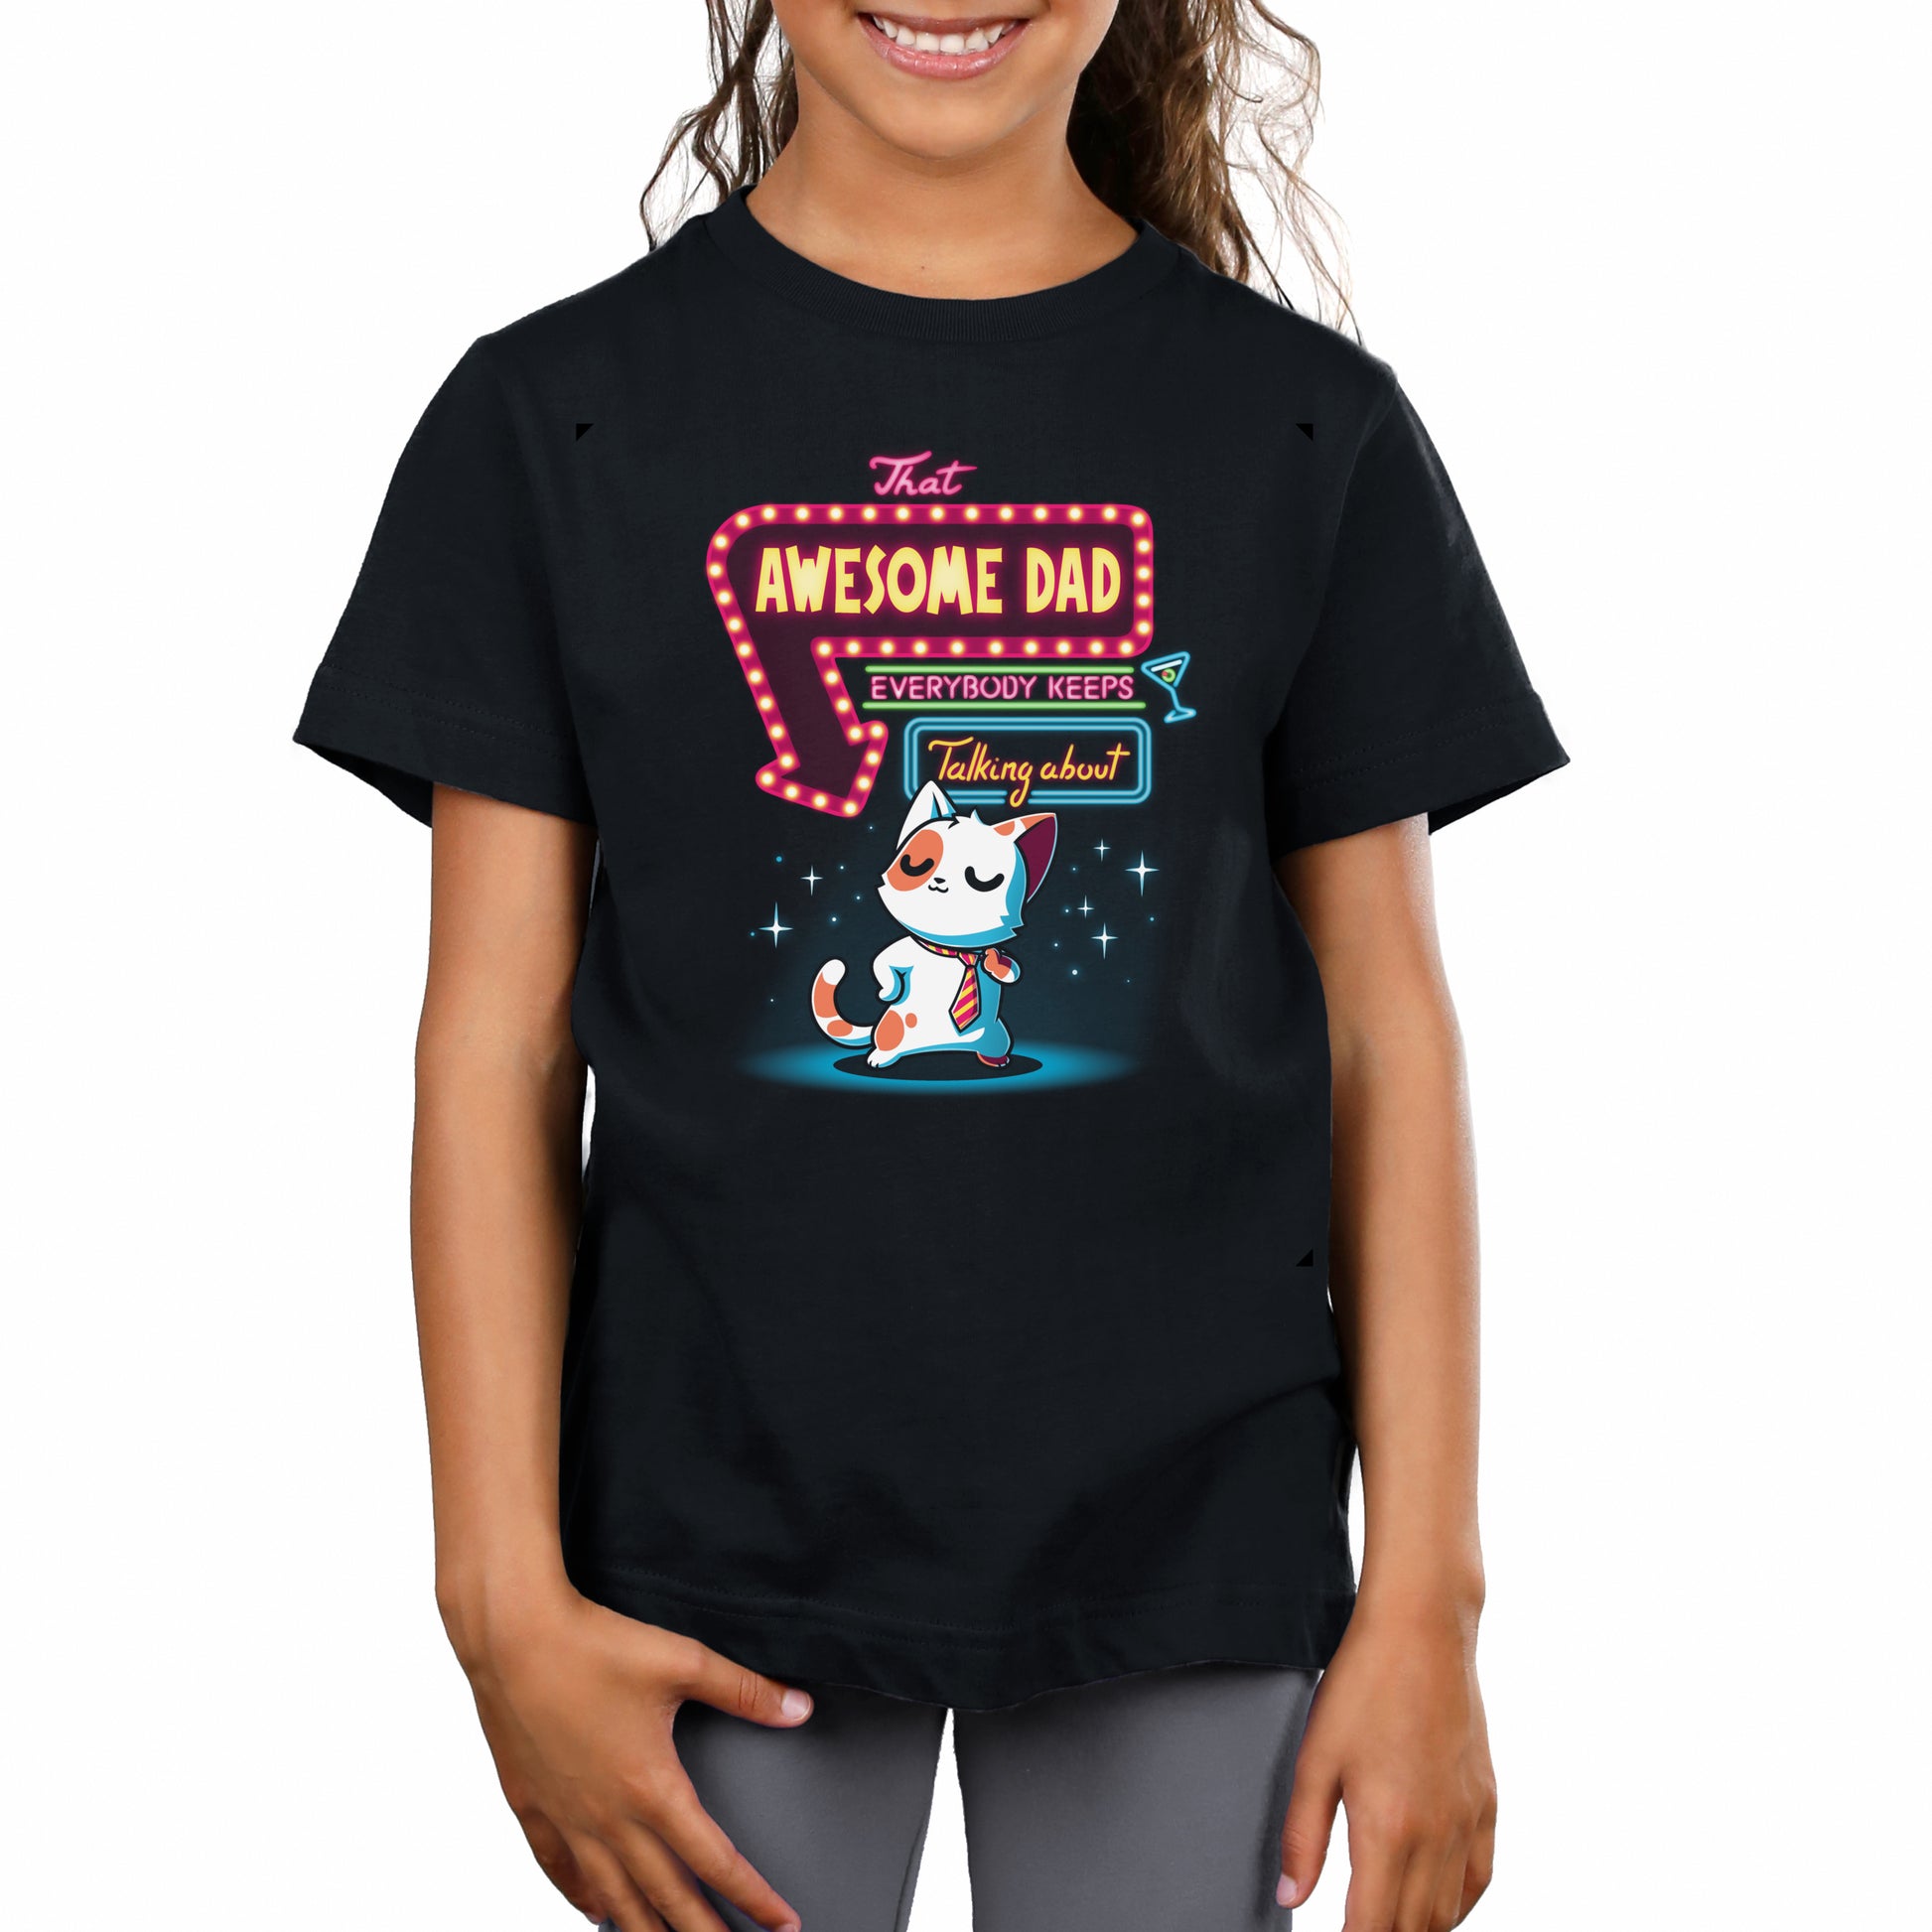 A person wearing a monsterdigital That Awesome Dad super soft ringspun cotton black T-shirt featuring a cartoon cat and the phrase "That AWESOME DAD everybody keeps talking about" printed on it.